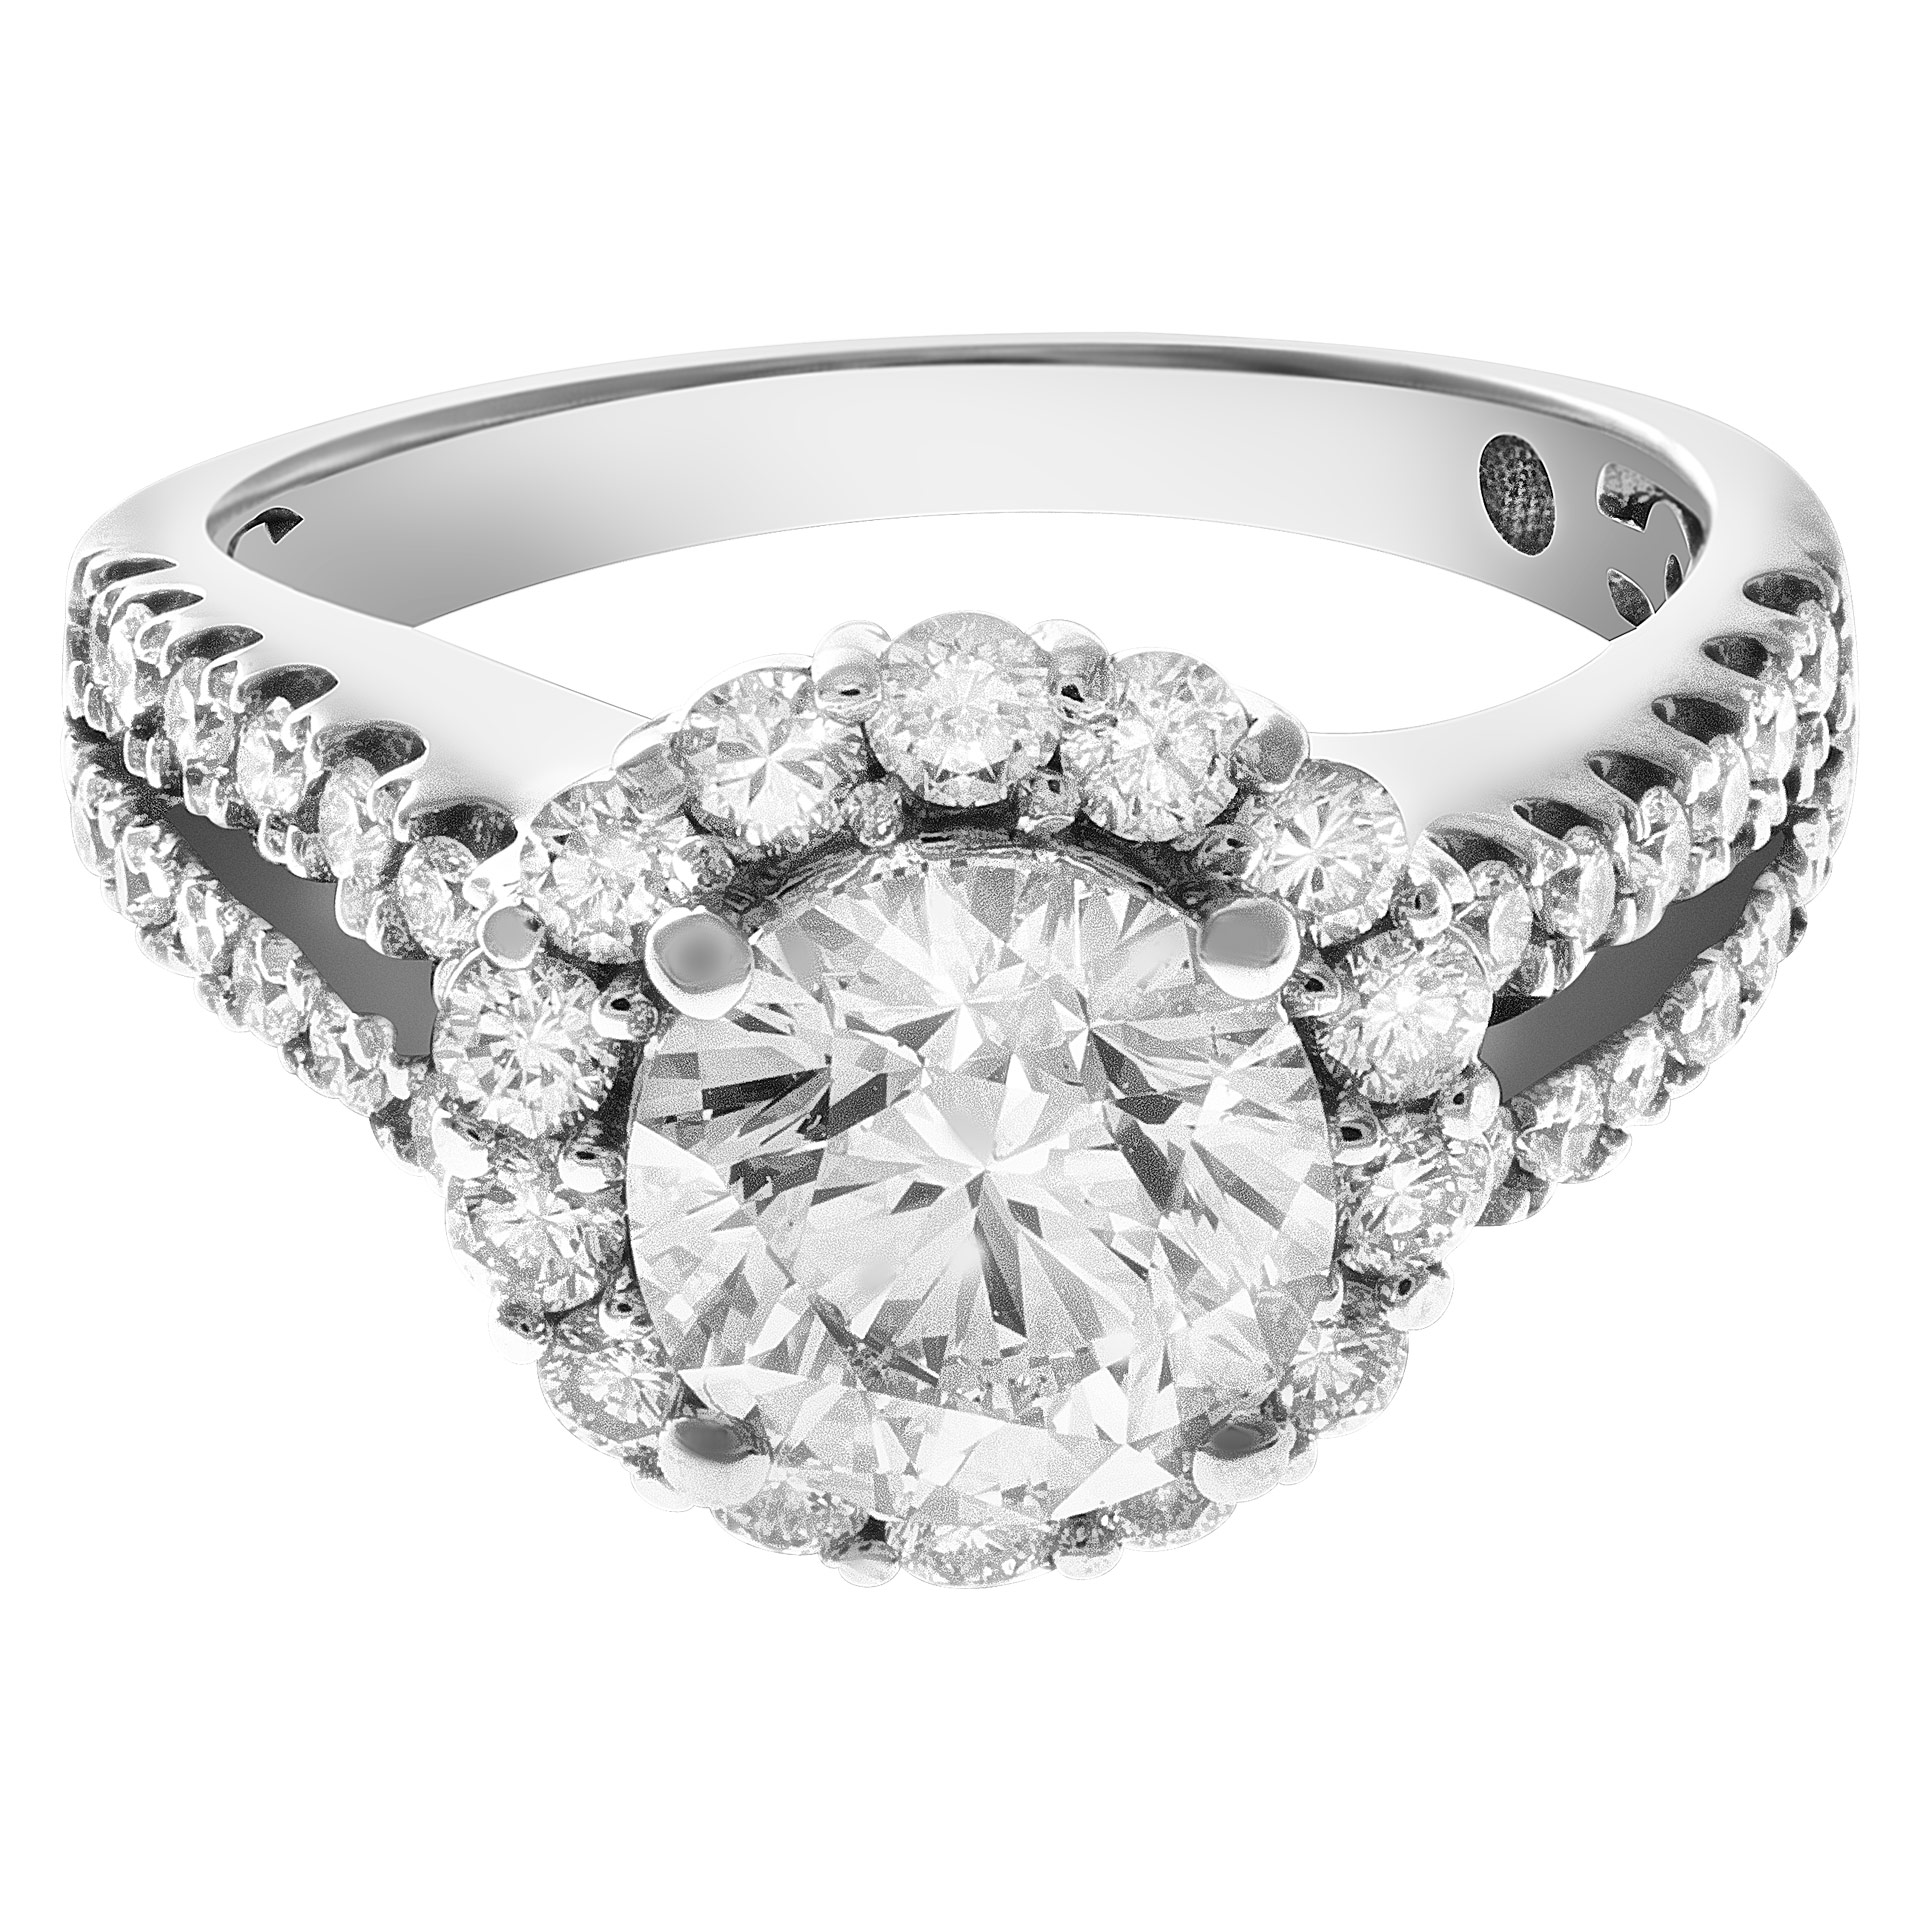 GIA certified round brilliant cut diamond ring 2.01 carats (H color, VS2 clarity) set in 18k white gold. Size 7